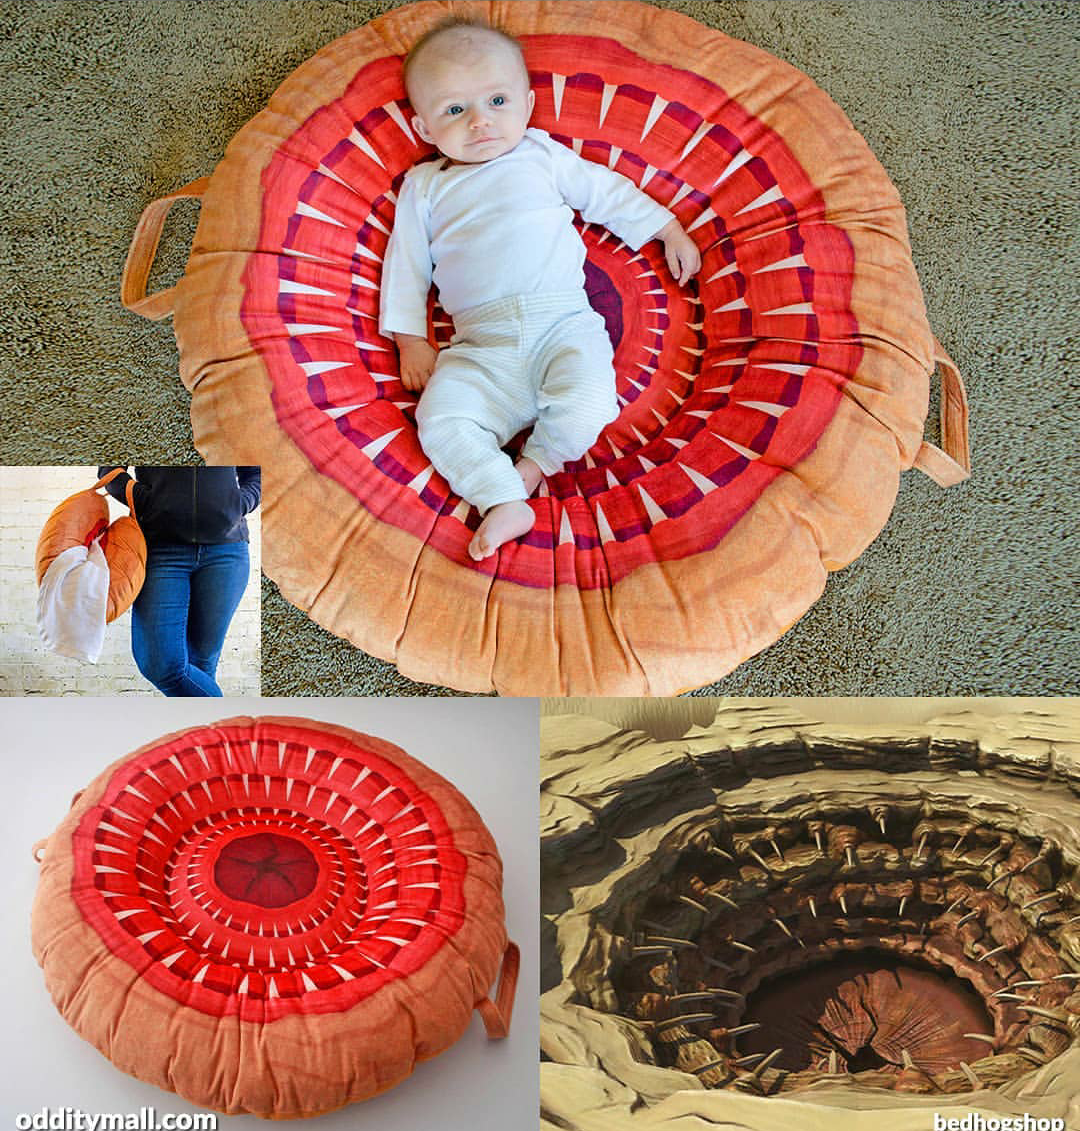 There is now a Star Wars Sarlacc Pit Pillow